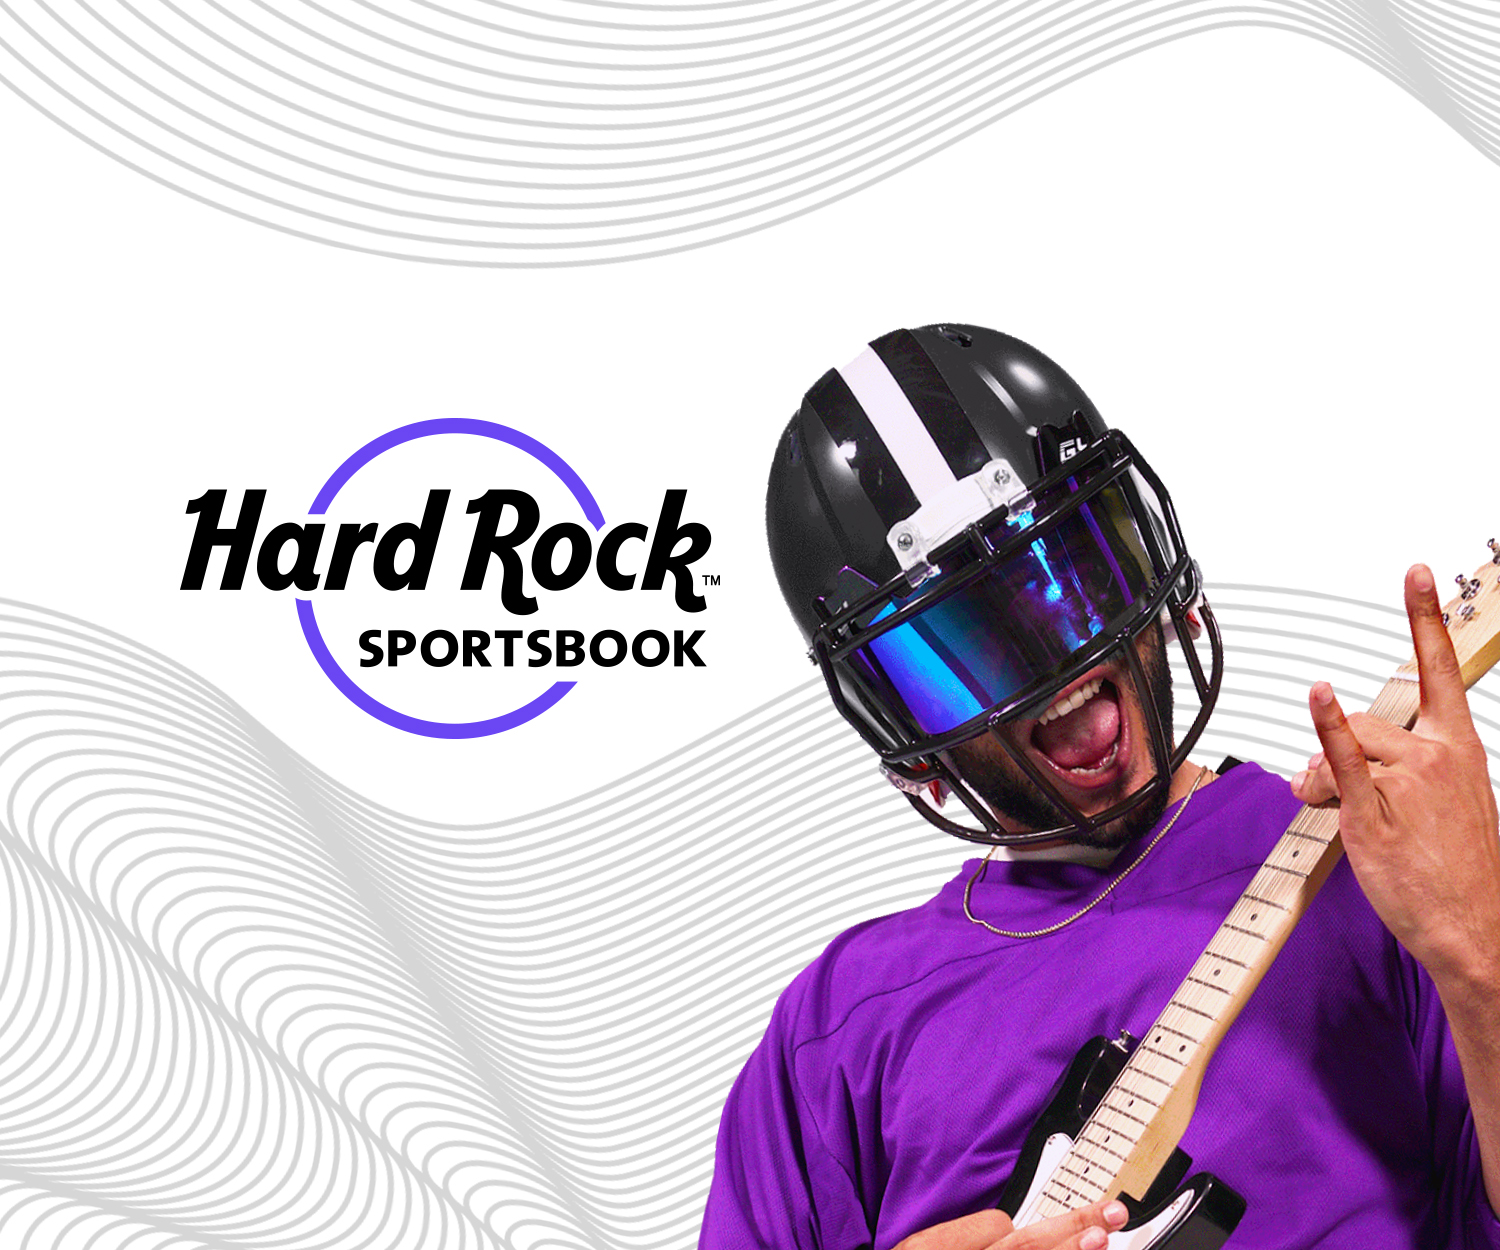 Hedge with Hard Rock Sportsbook, Fade the Field Goal